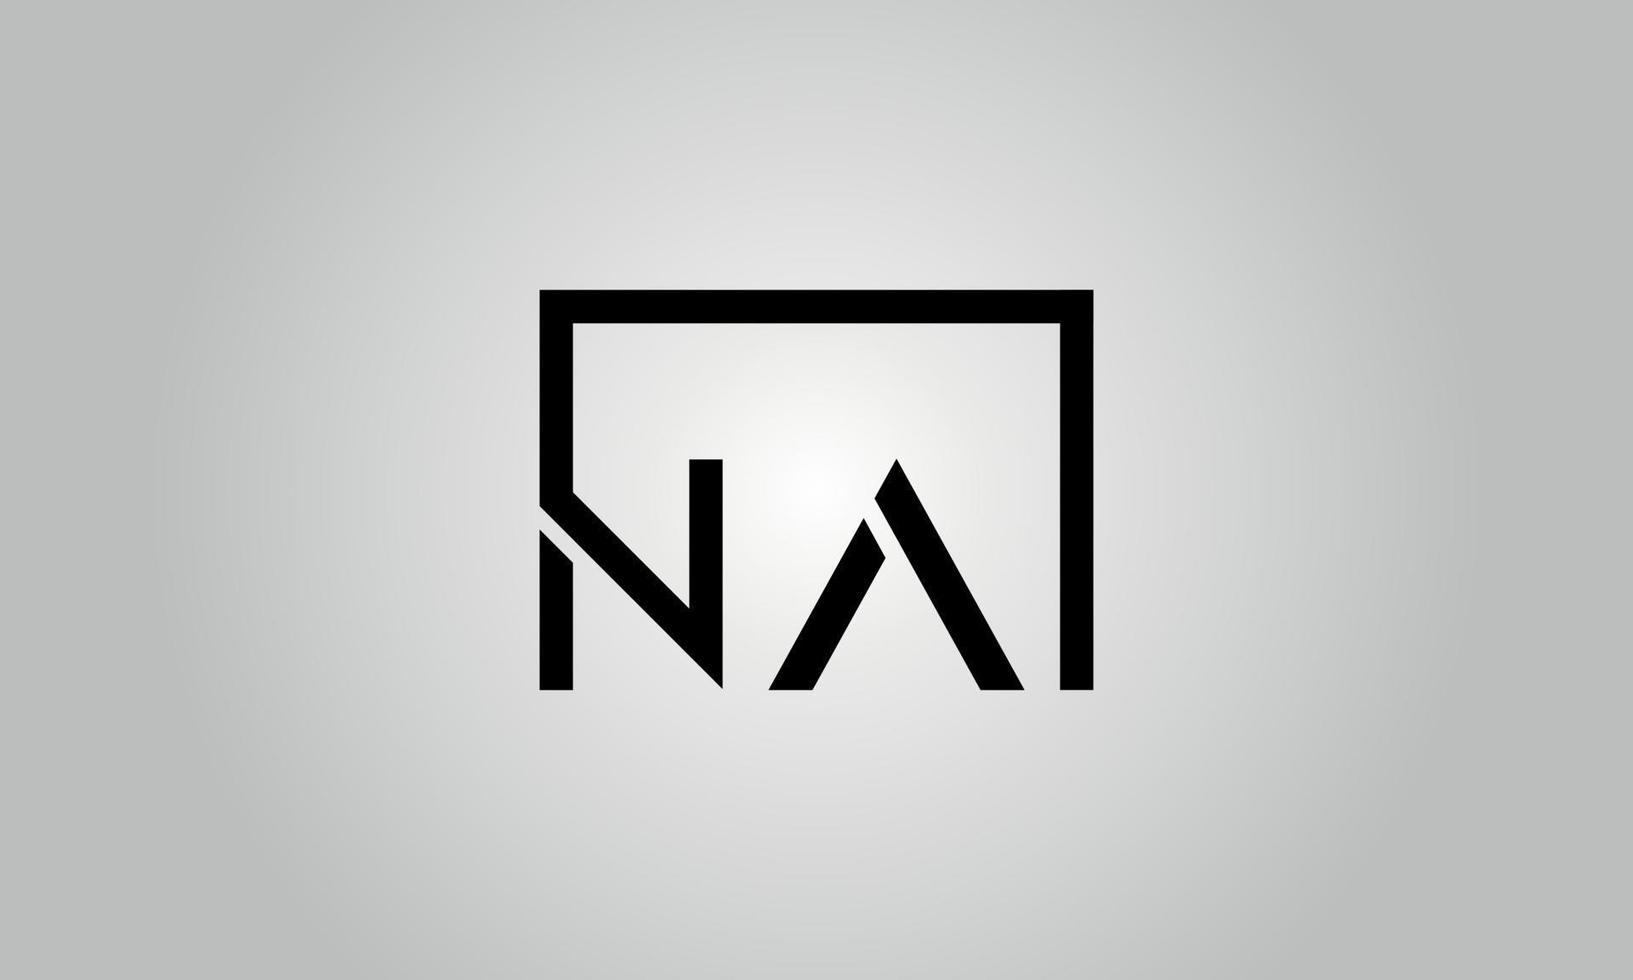 Letter NA logo design. NA logo with square shape in black colors vector free vector template.